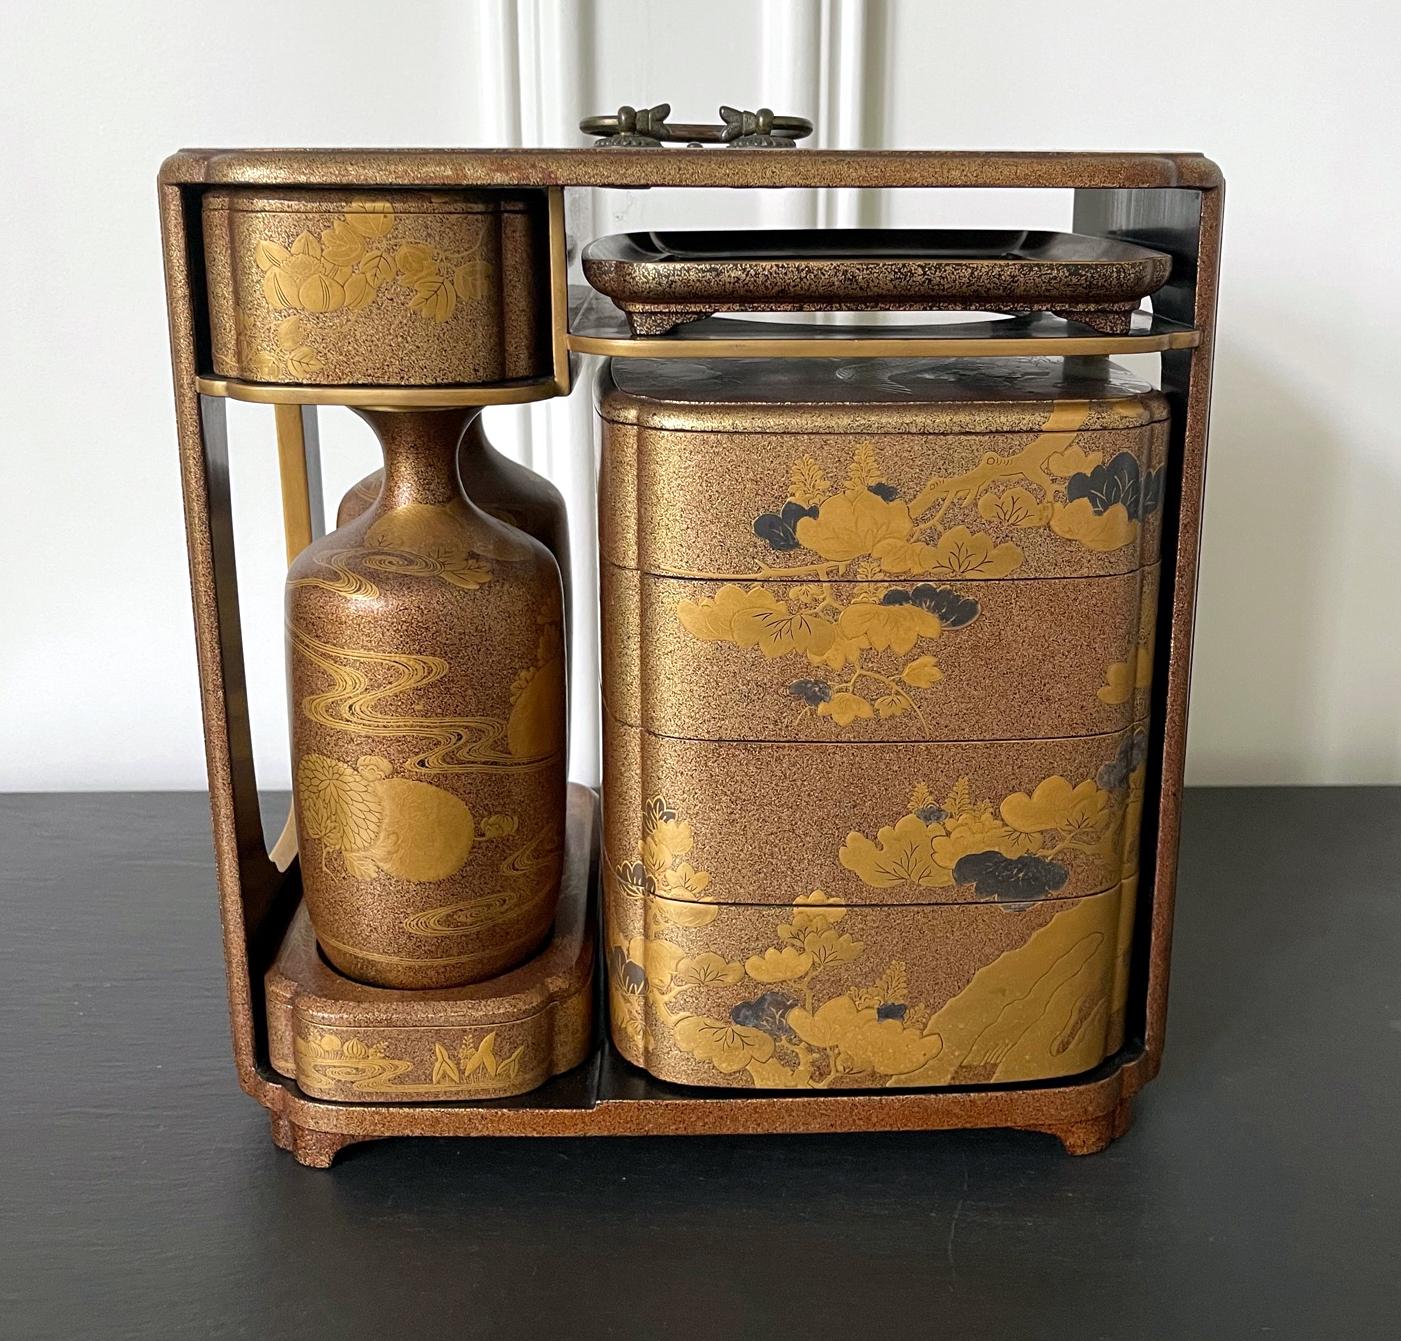 Sagejubako is a portable picnic set that became popular in the early Edo period when an additional meal was added between breakfast and dinner. It normally consists of a carry case with a handle on top and two sake bottles, an open serving tray, a